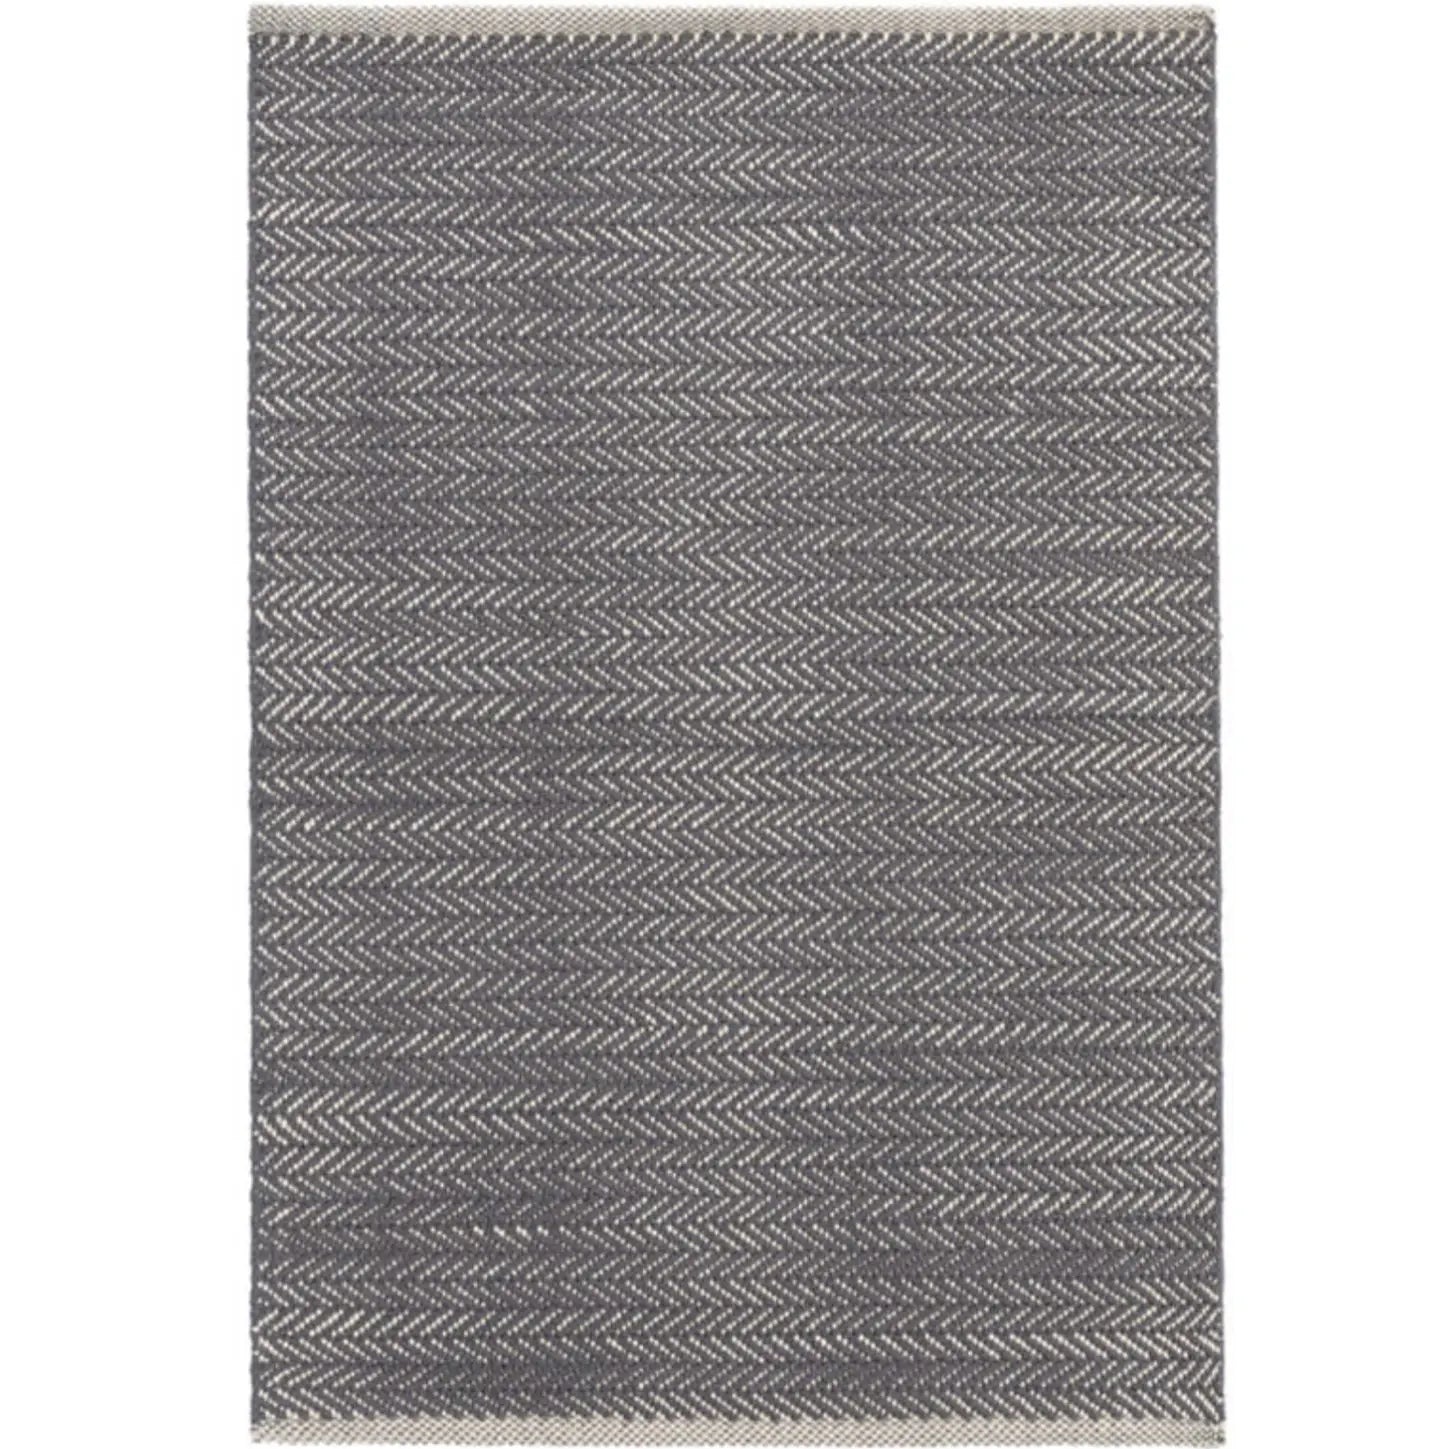 Herringbone Woven Cotton Rug in Shale - Home Smith